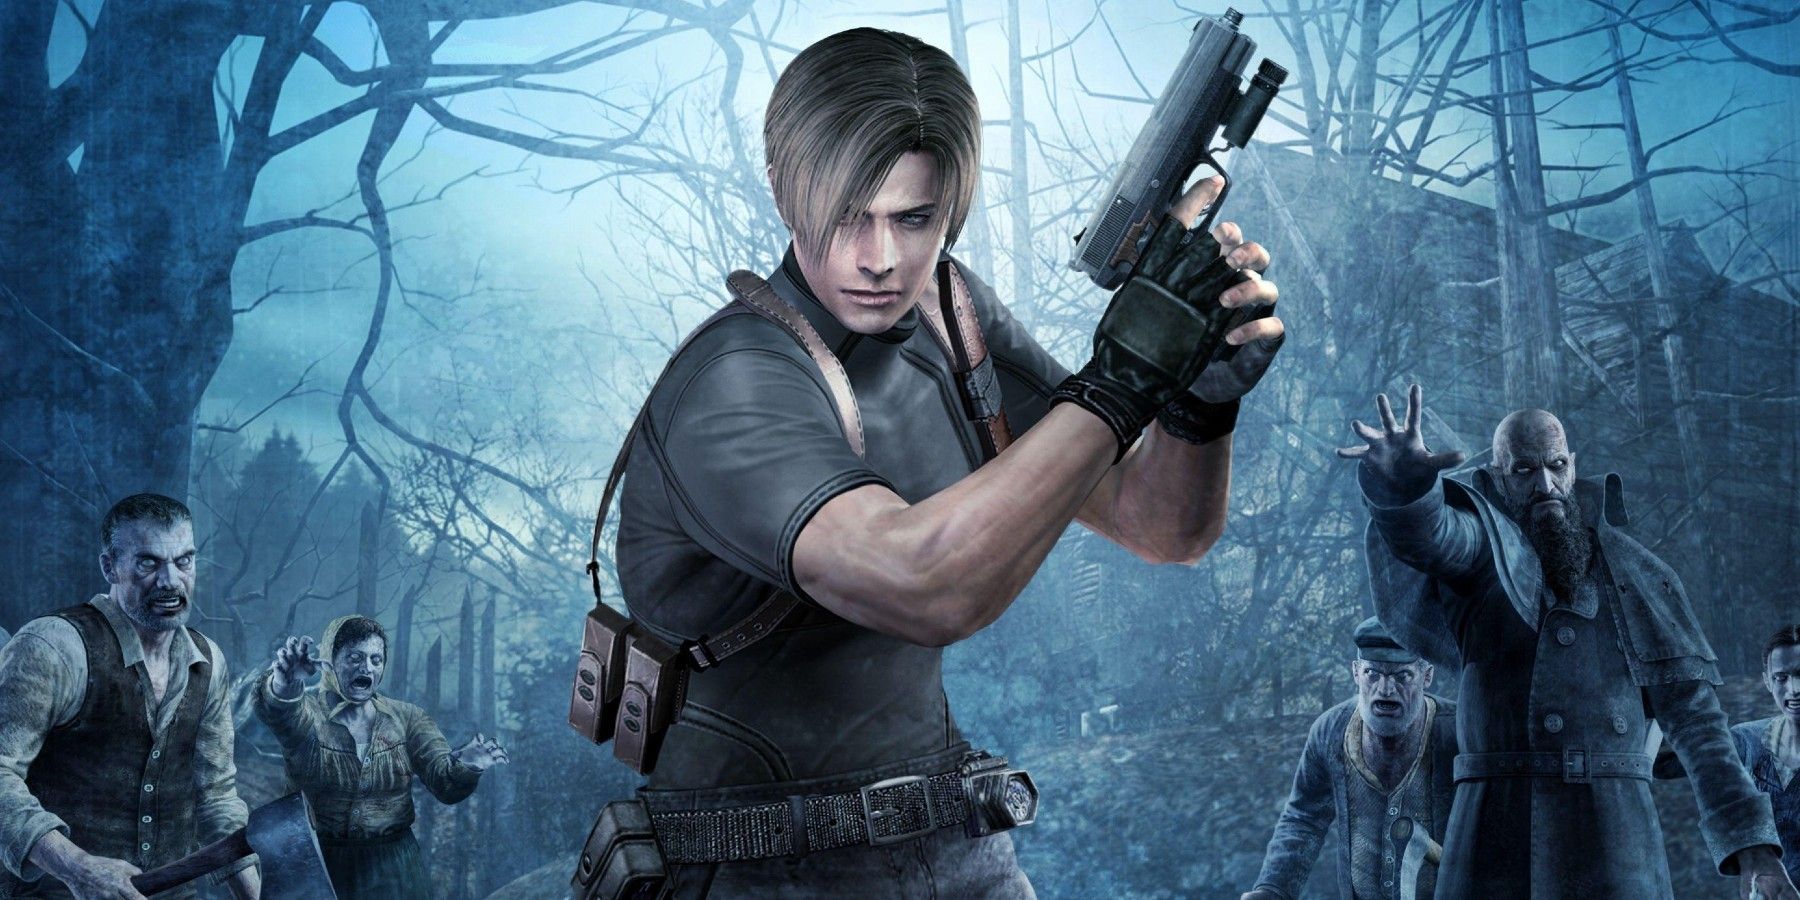 Leon Kennedy from Resident Evil 4 brandishing a gun and surrounded by zombies.